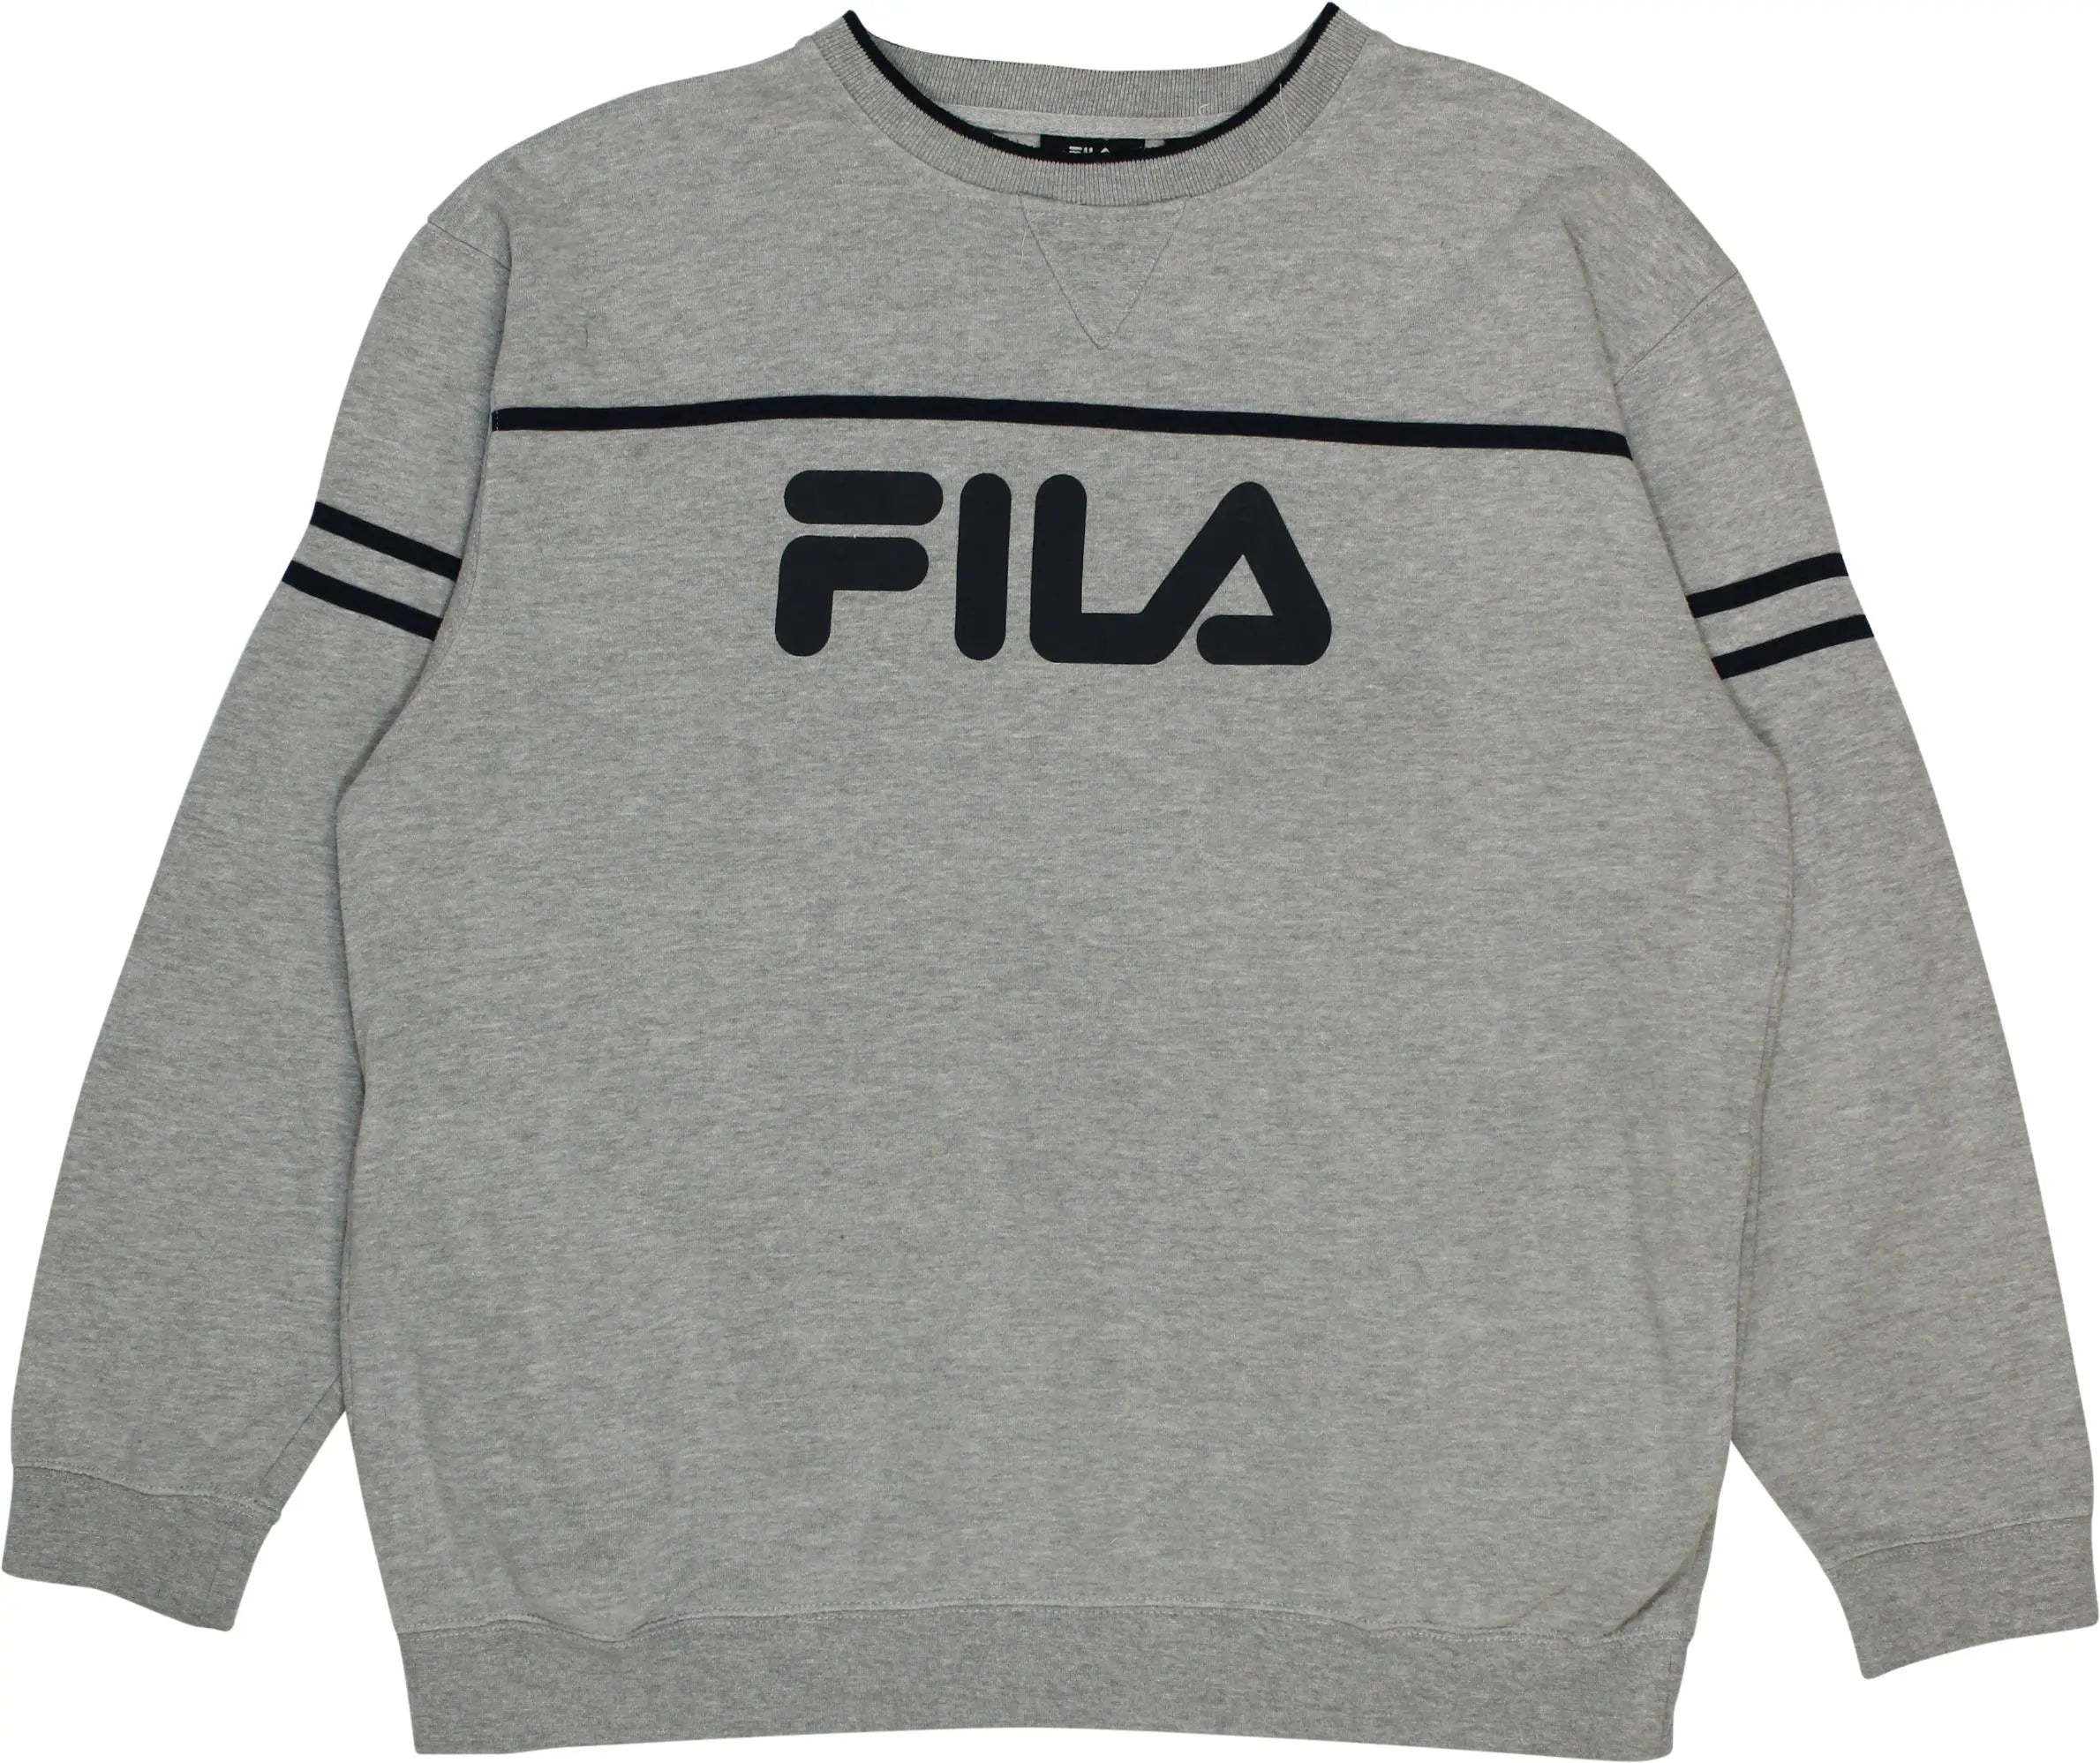 Fila - Grey Sweatshirt by Fila- ThriftTale.com - Vintage and second handclothing